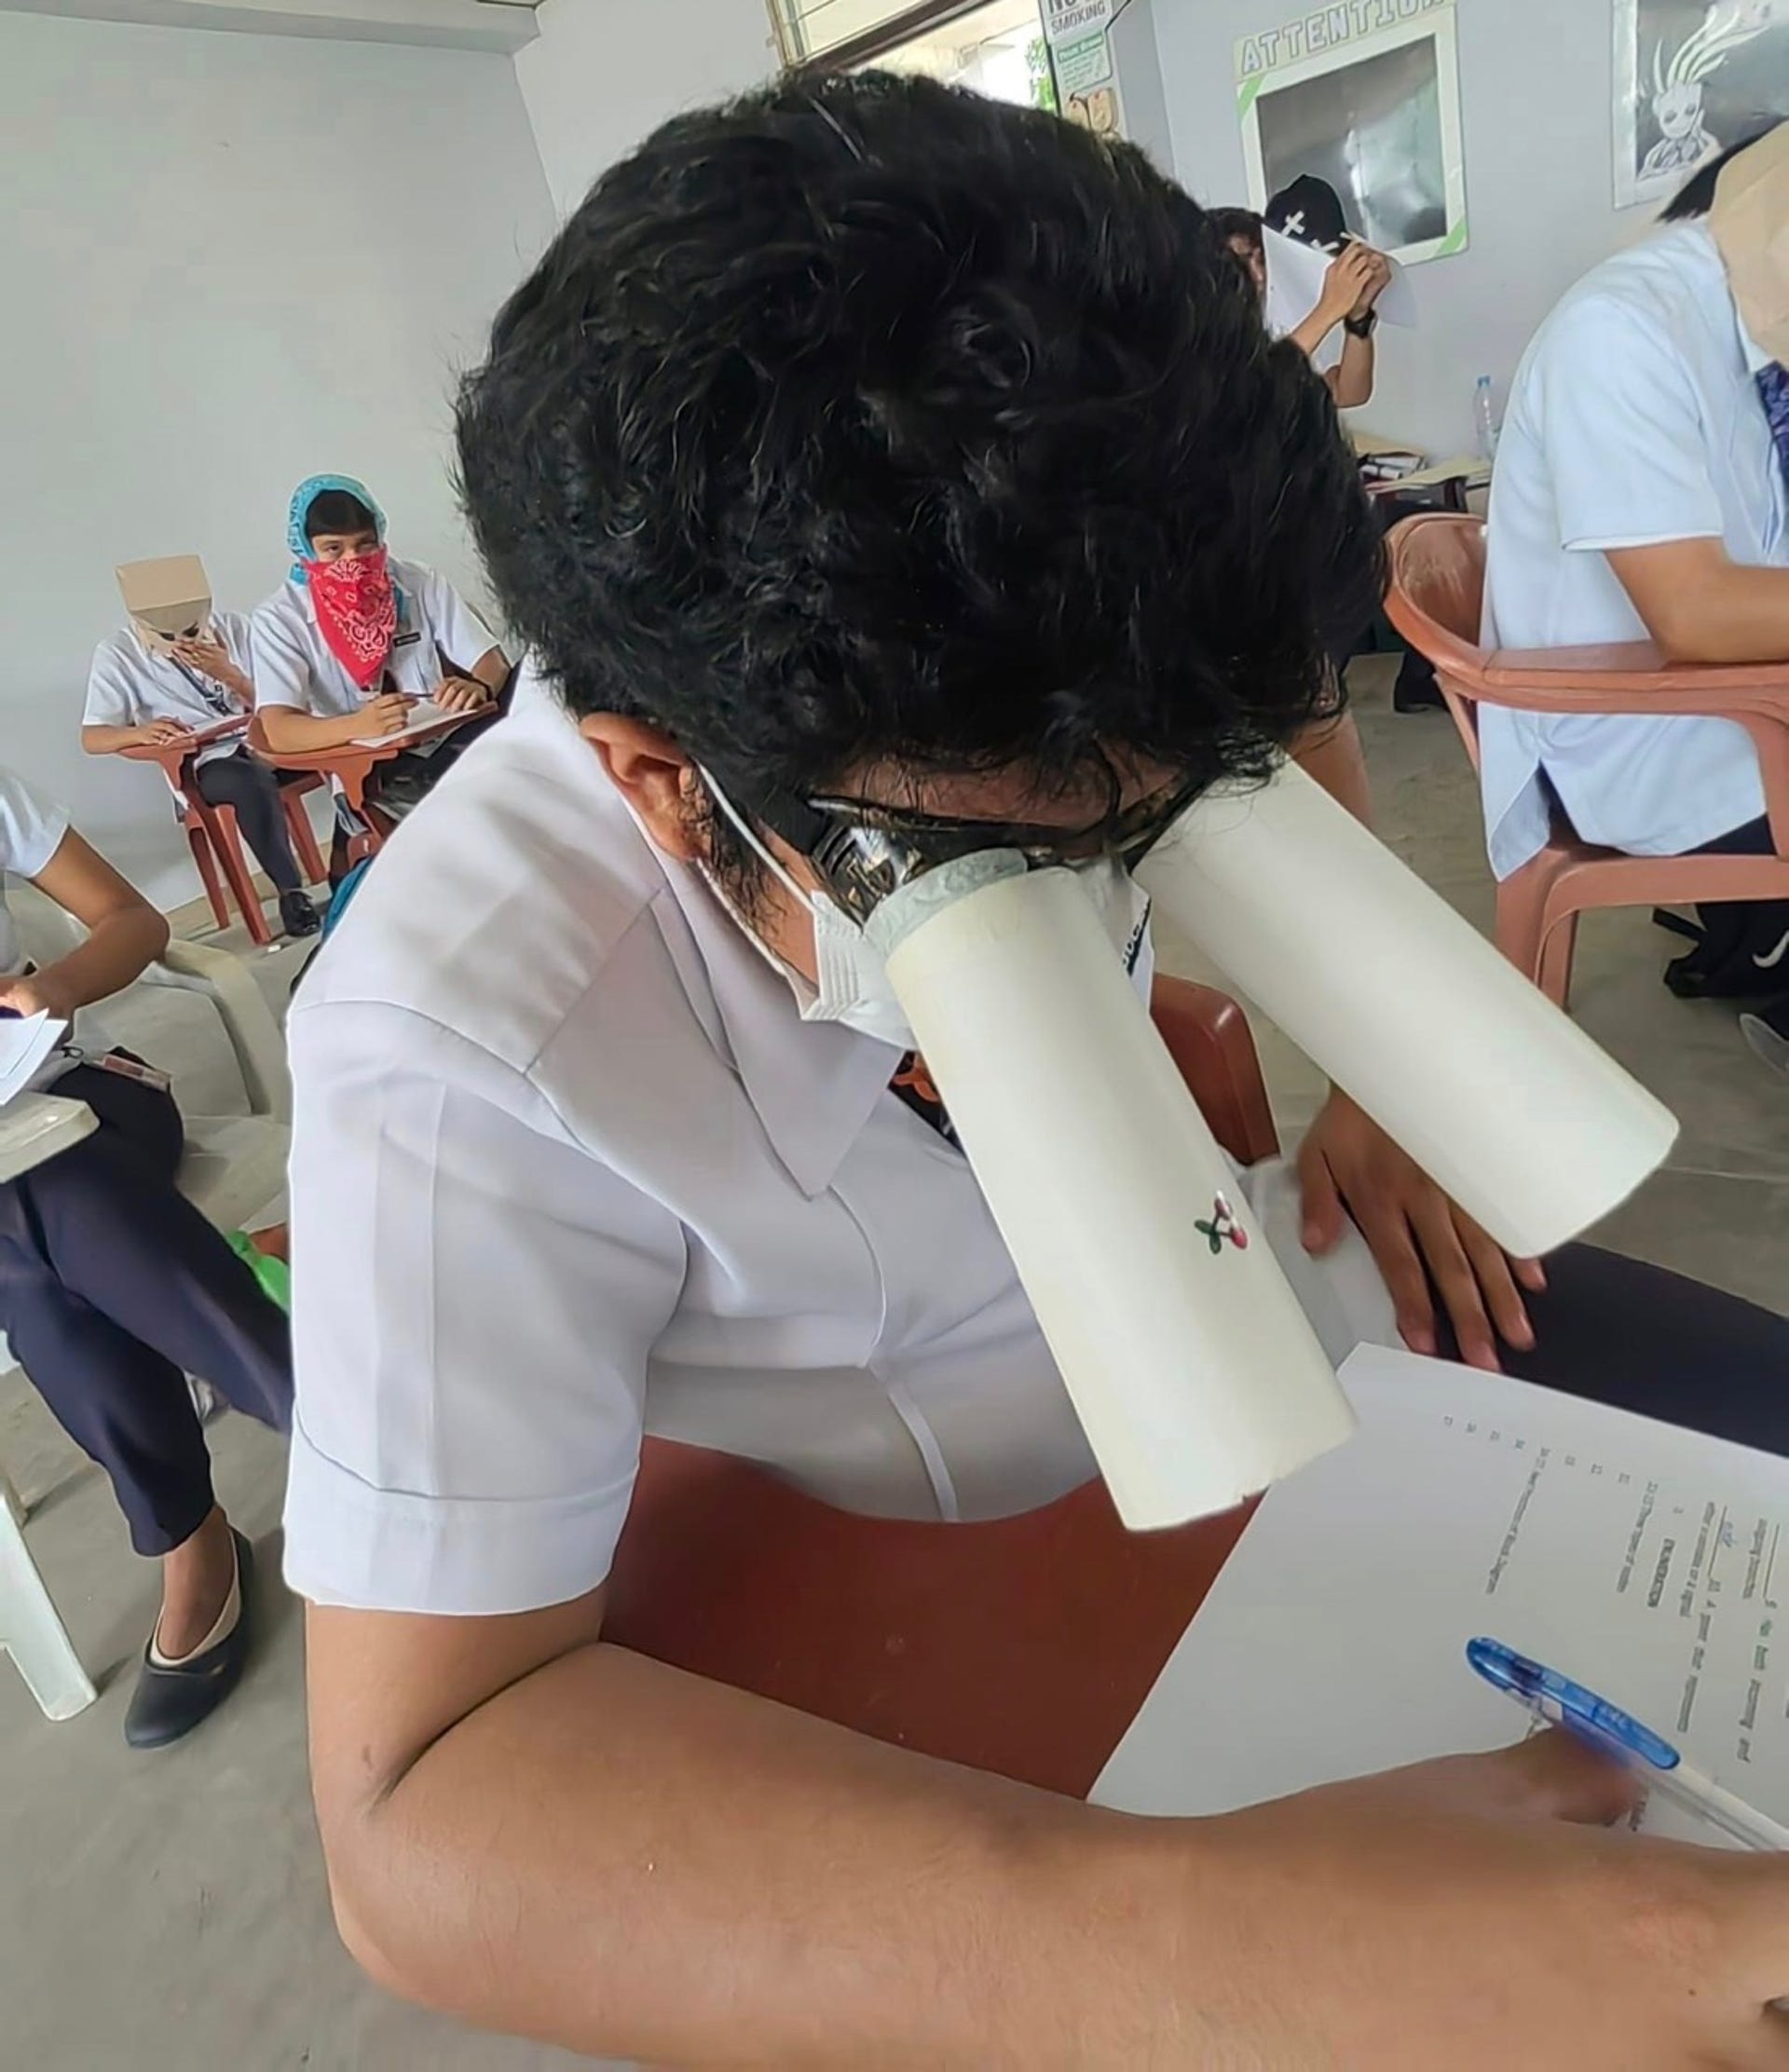 Student attaches tubes to his eyes to block the view of his test